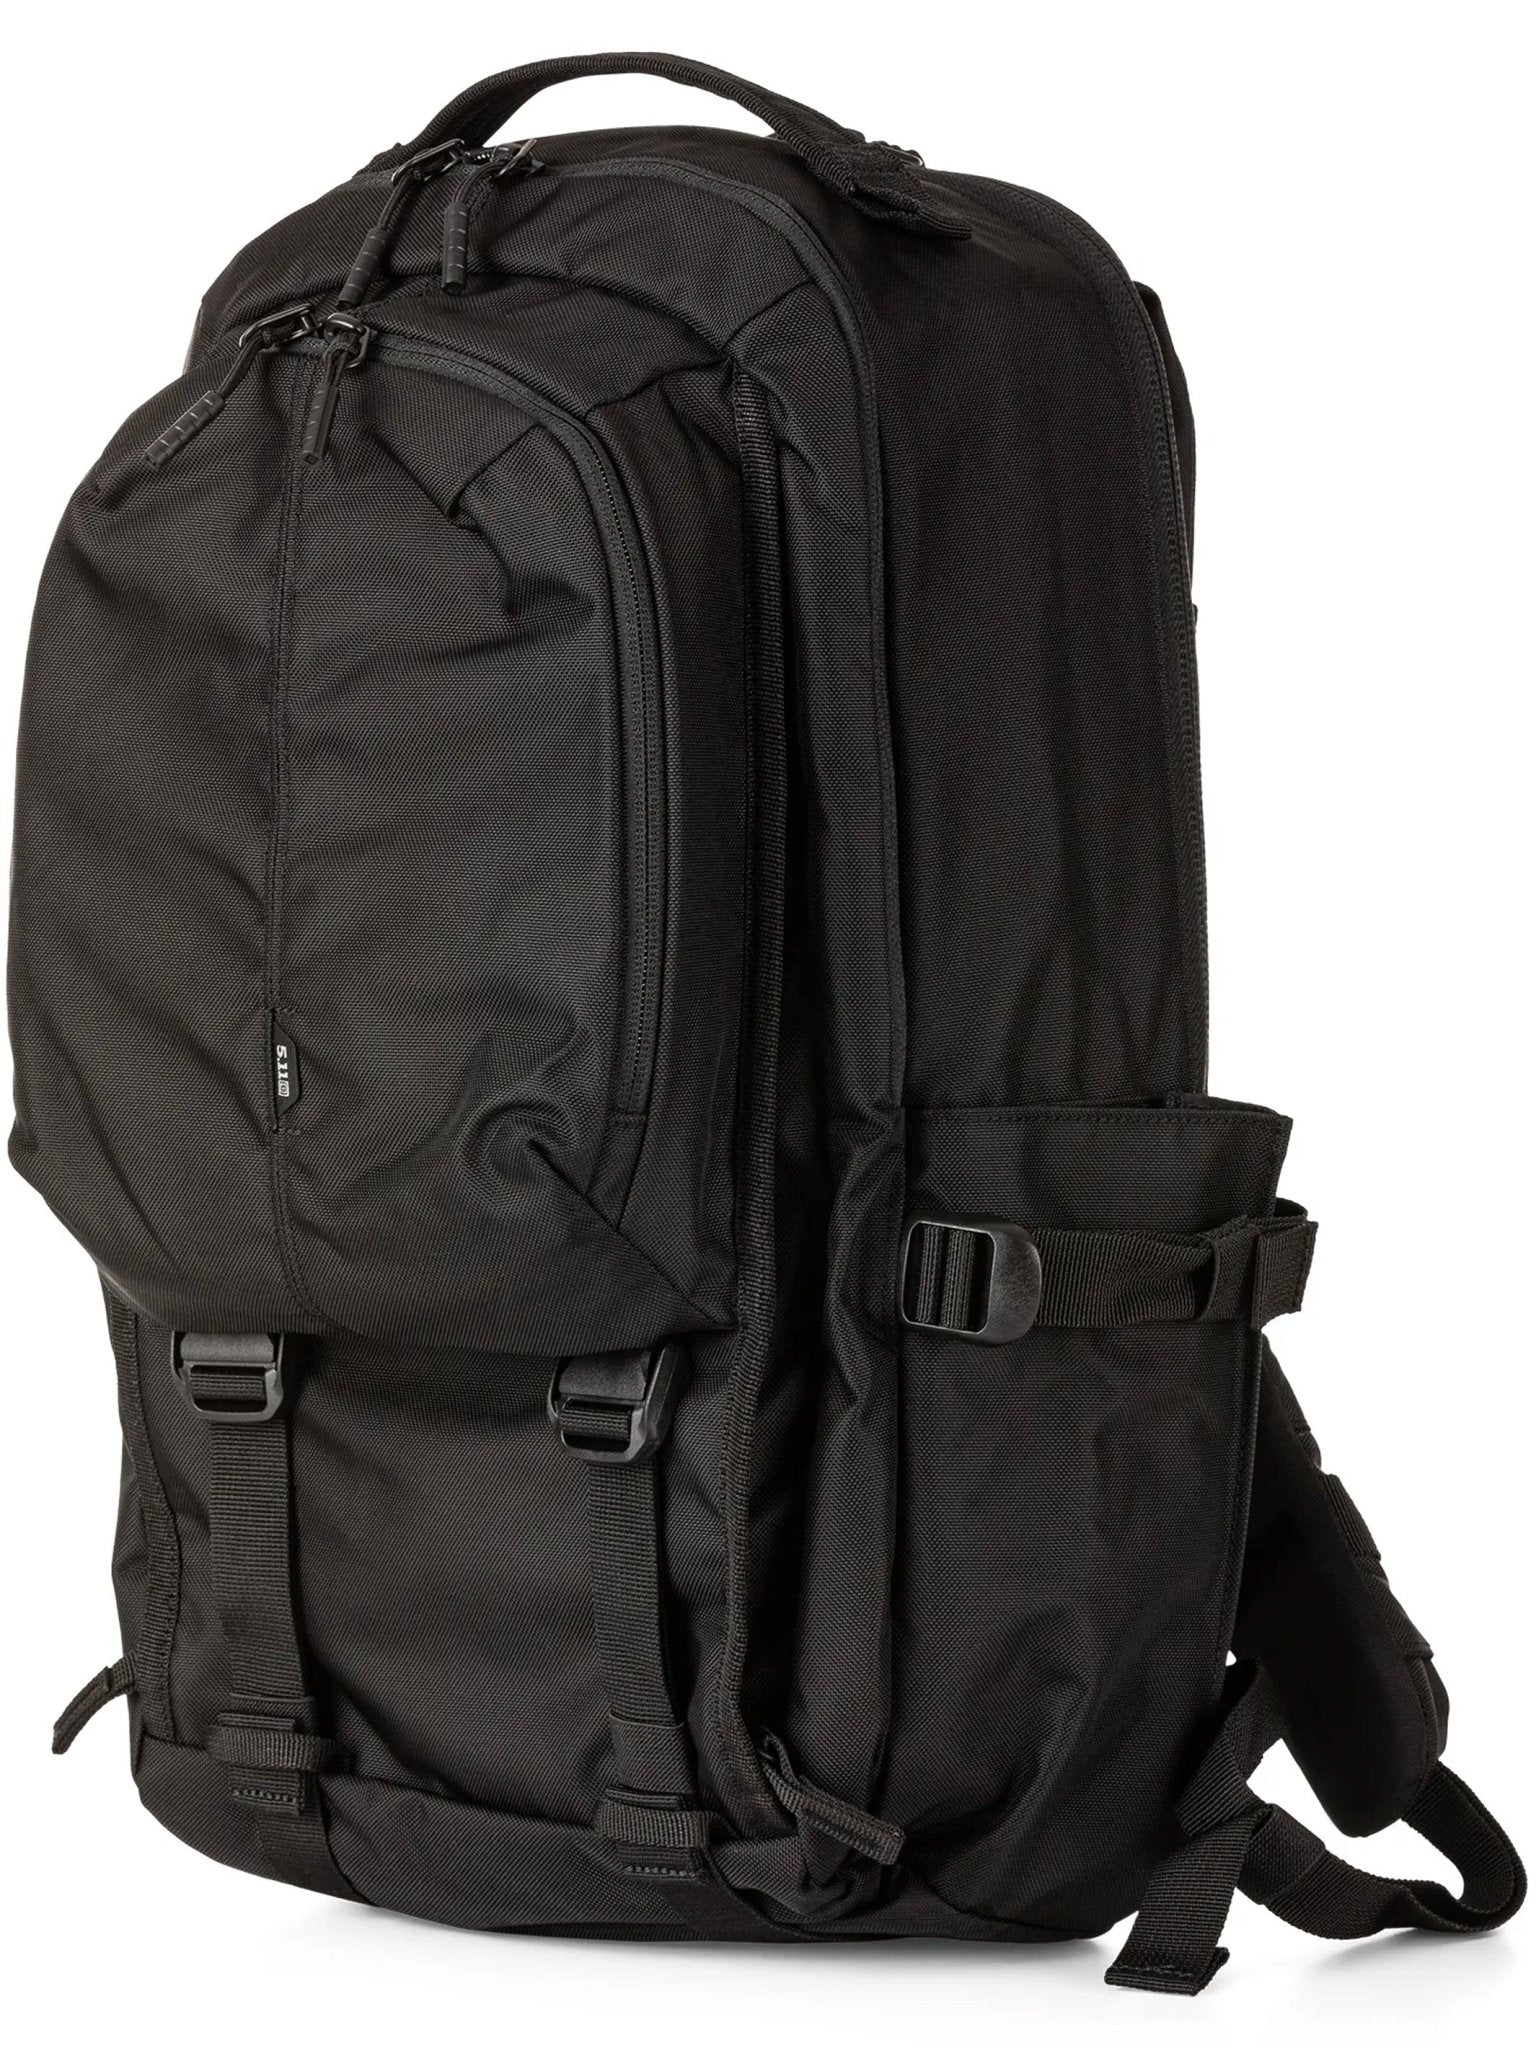 4elementsclothing5.11 Tactical5.11 Tactical - 5.11 Tactical LV18 BACKPACK 2.0 30L - Style 56700Bag56700-019